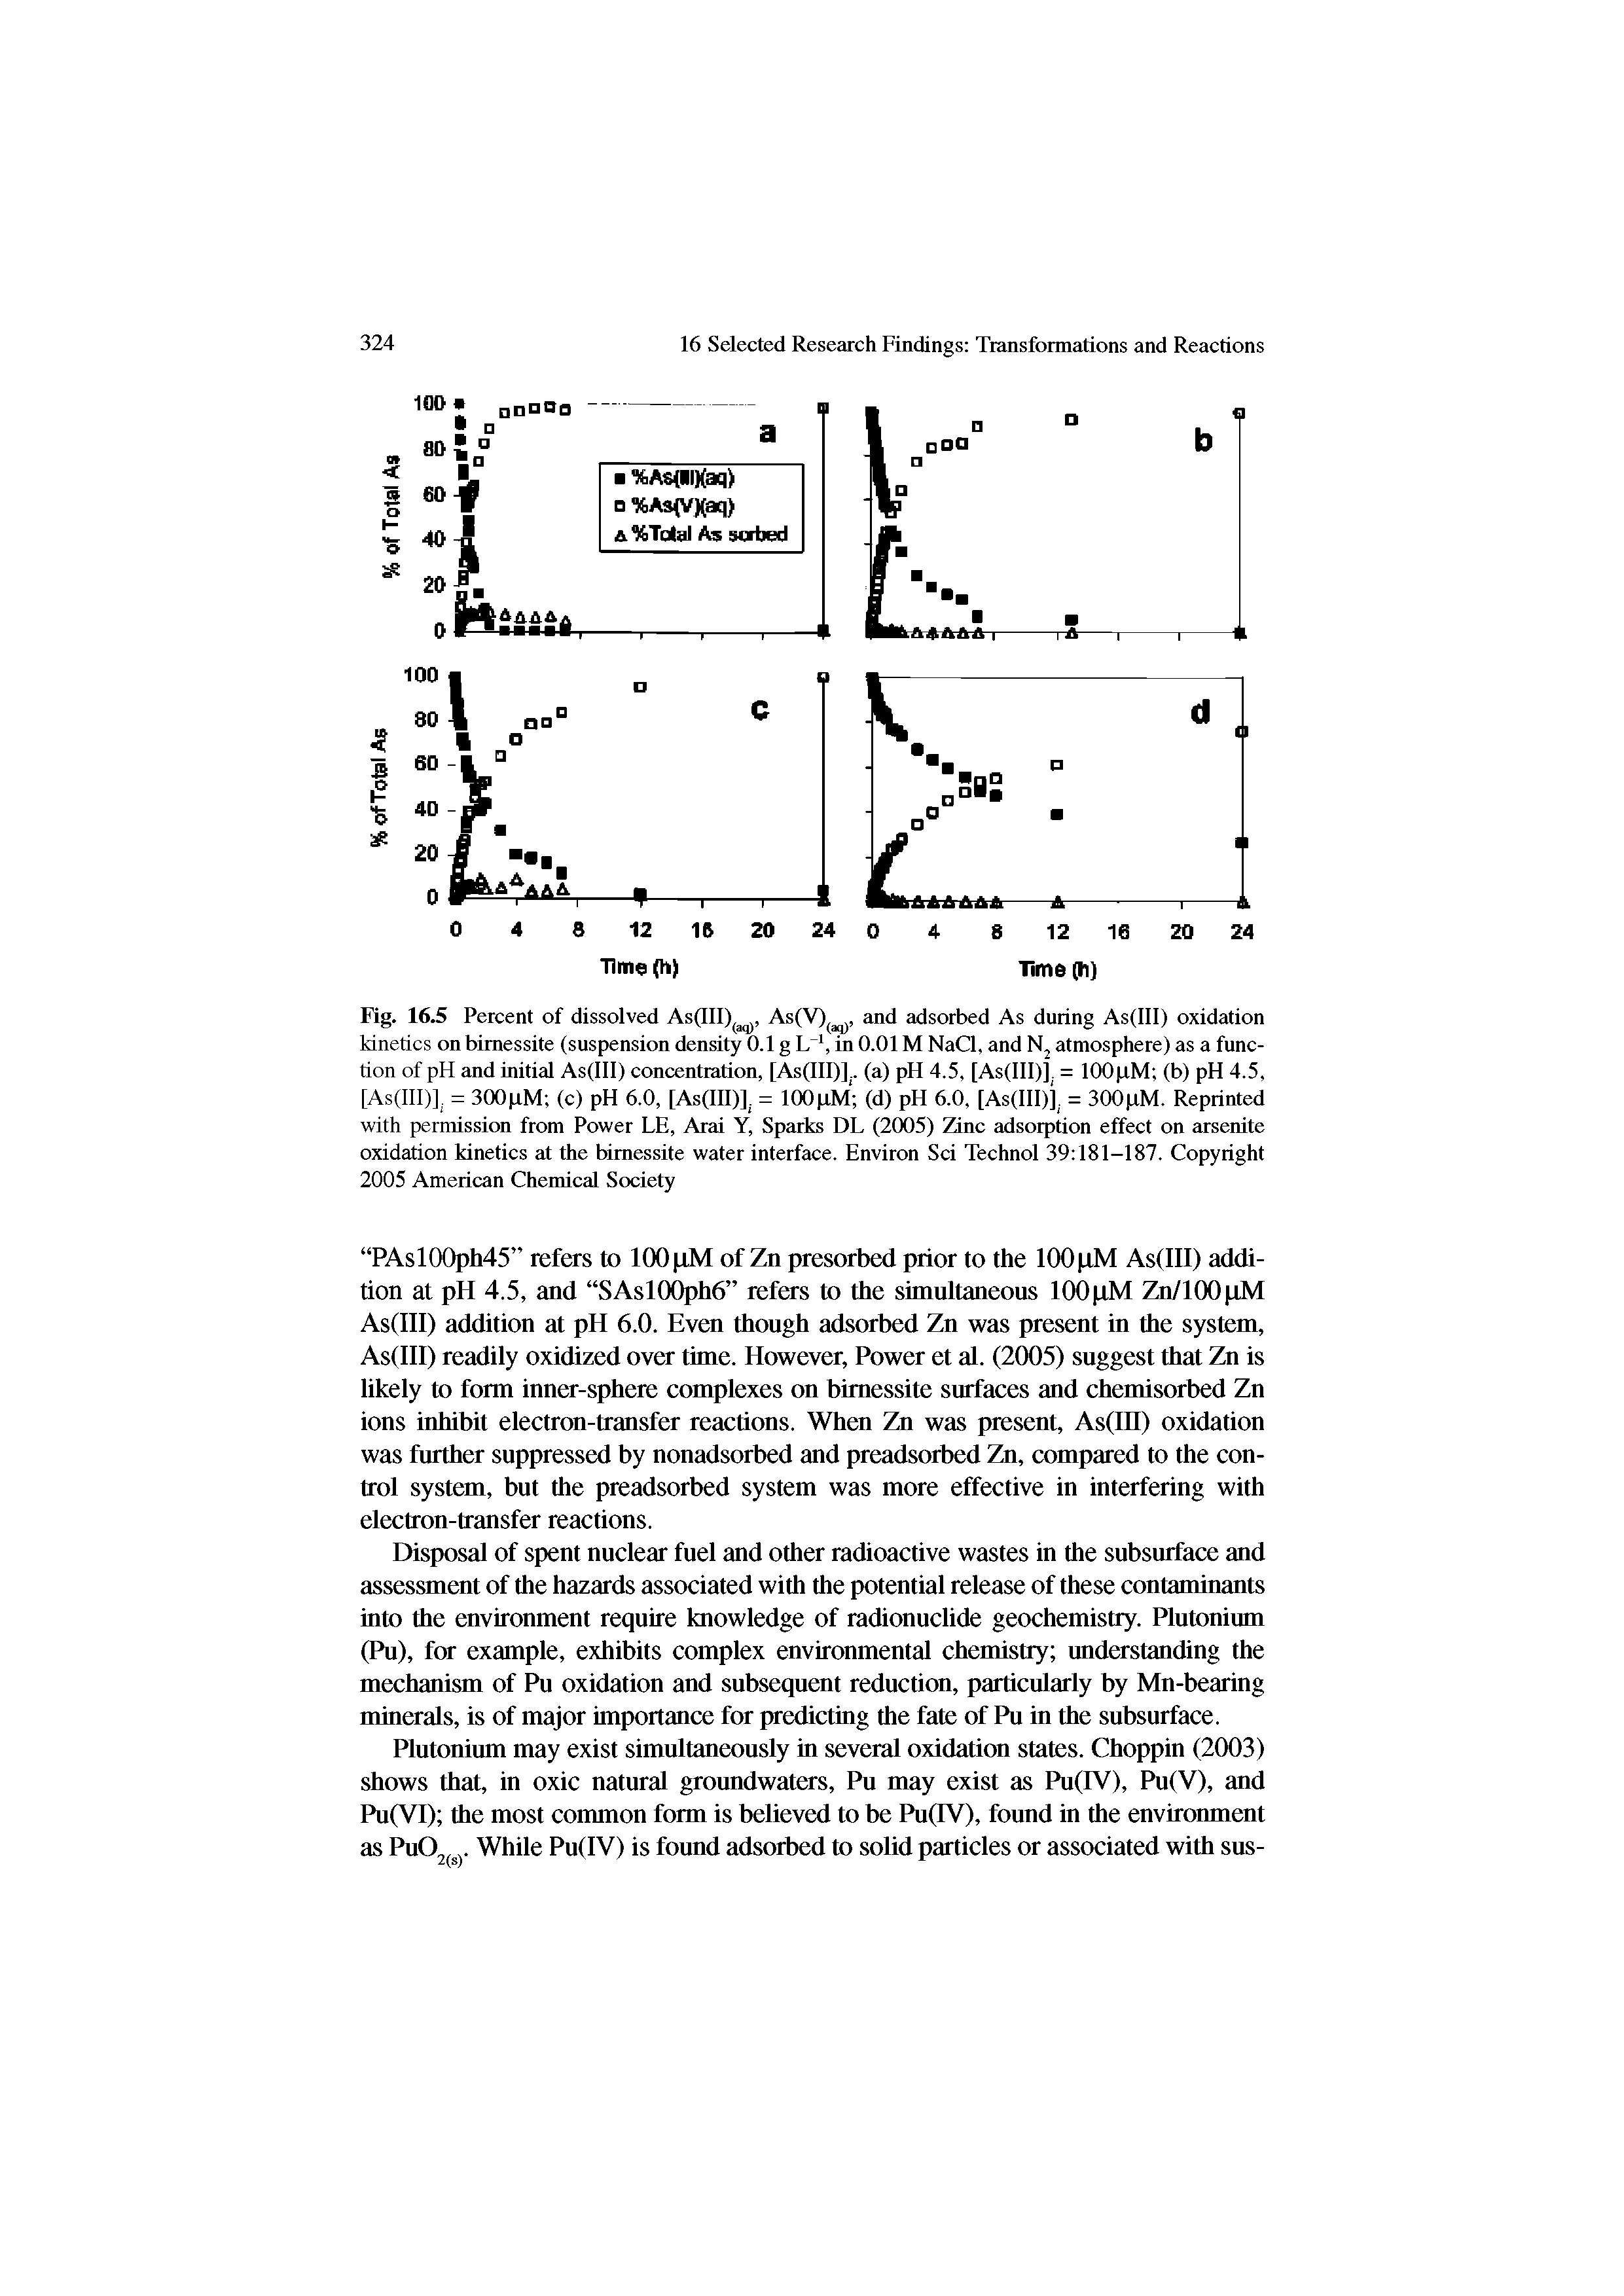 Fig. 16.5 Percent of dissolved As(lll), As(V)(3,j, and adsorbed As during As(III) oxidation kinetics on bimessite (suspension density 0.1 g Lin 0.01 M NaCl, and atmosphere) as a function of pH and initial As(lll) concentration, [As(lll)].. (a) pH 4.5, [As(lll)]. = lOOpM (b) pH 4.5, [As(III)]. = 300pM (c) pH 6.0, [As(lll)]. = lOOpM (d) pH 6.0, [As(lll)]. = 300pM. Reprinted with permission from Power LE, Arai Y, Sparks DL (2005) Zinc adsorption effect on arsenite oxidation kinetics at the bimessite water interface. Environ Sci Technol 39 181-187. Copyright 2005 American Chemical Society...